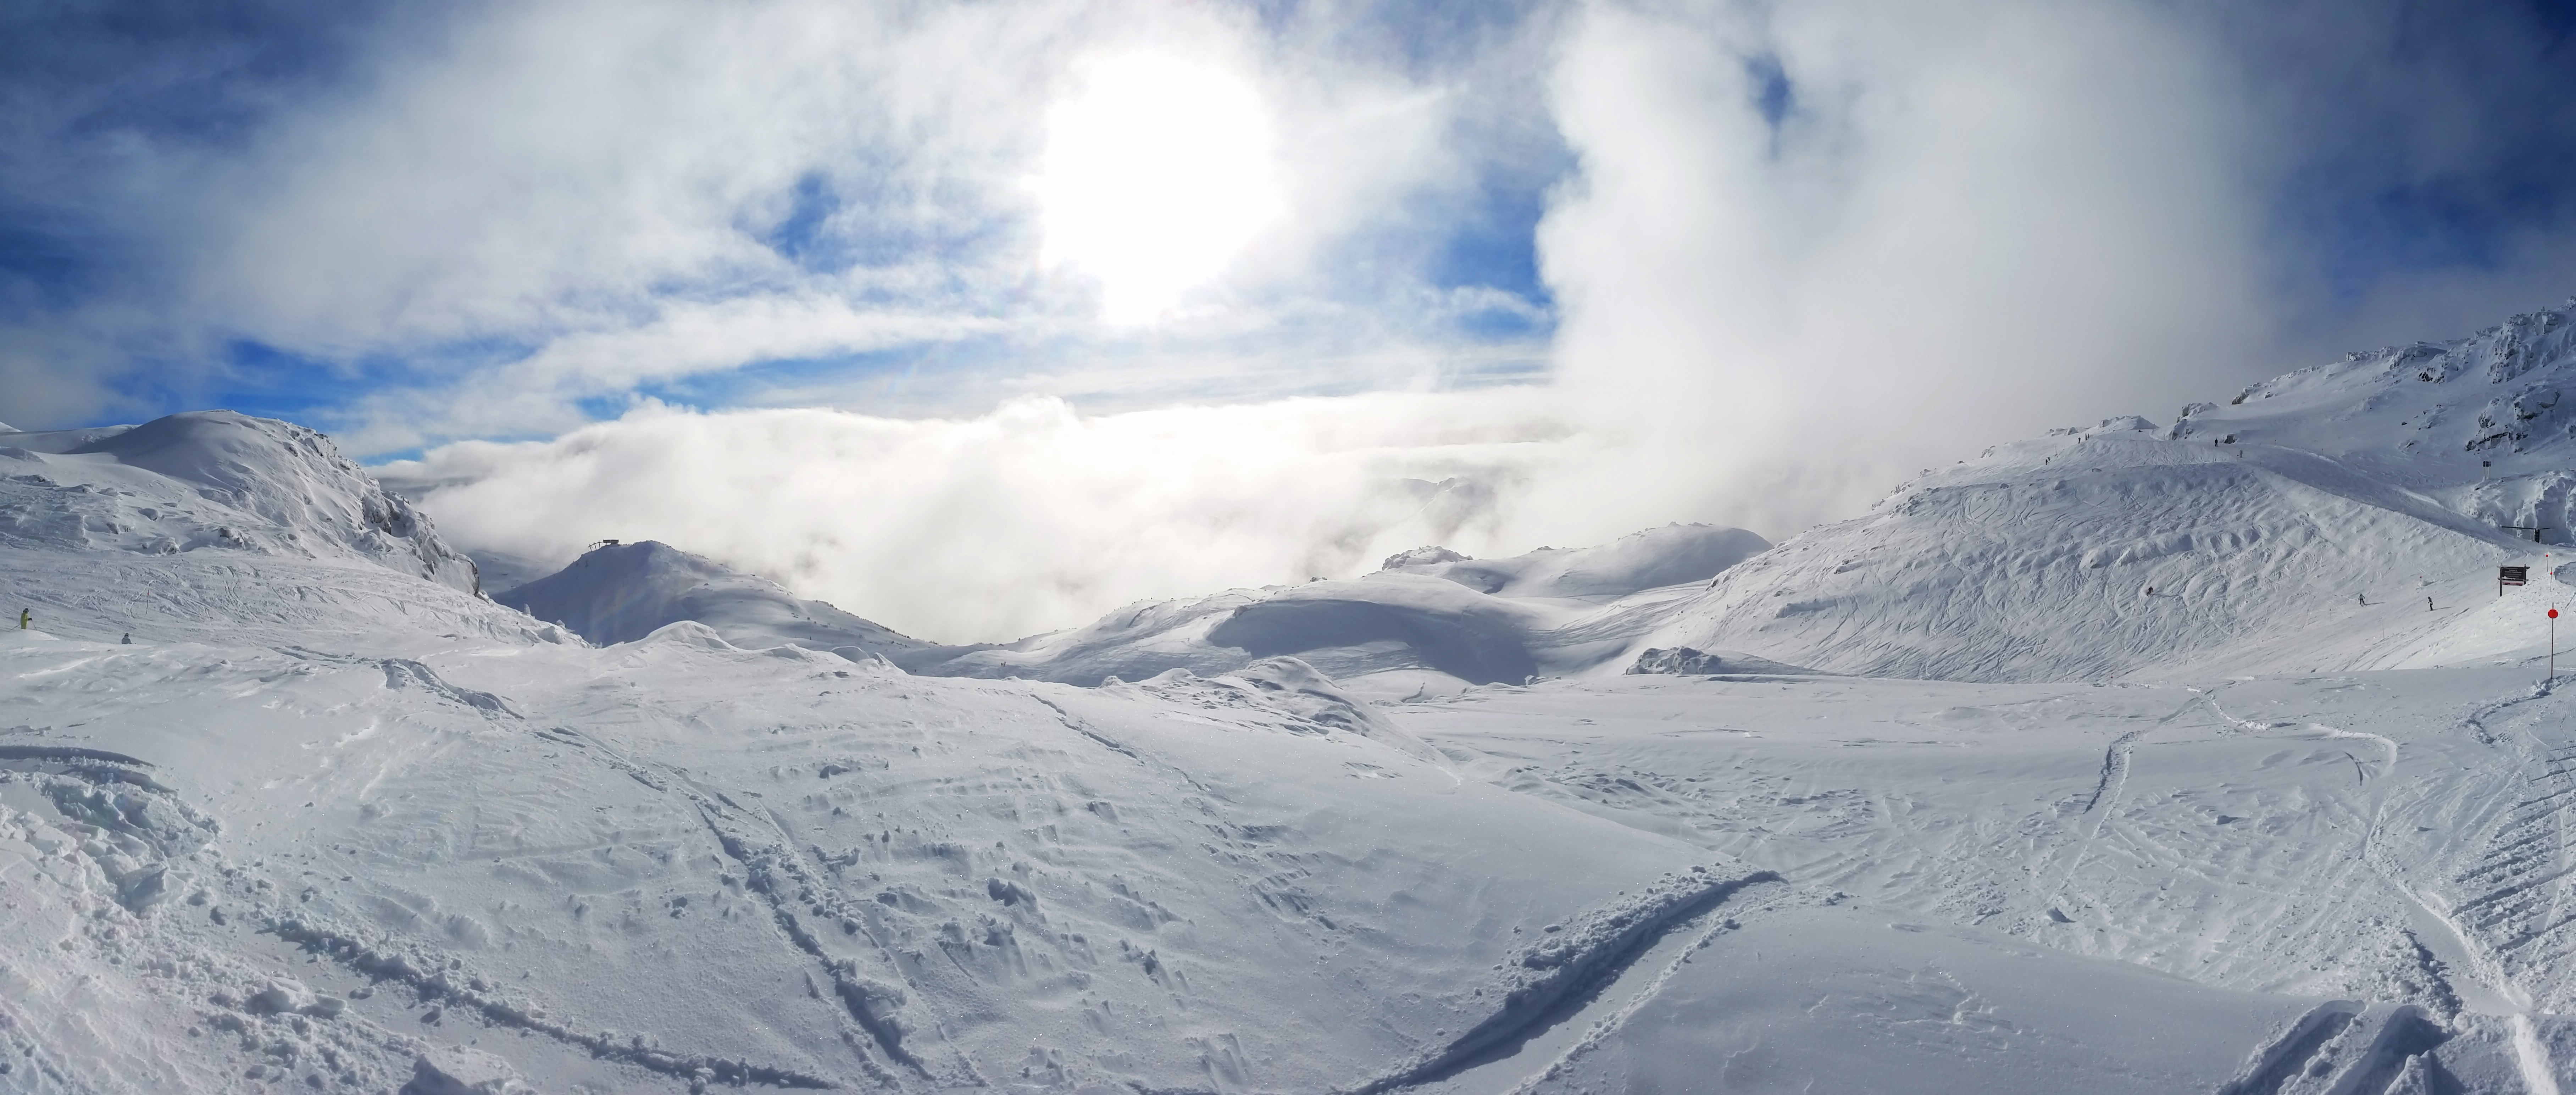 January at the top of Whistler